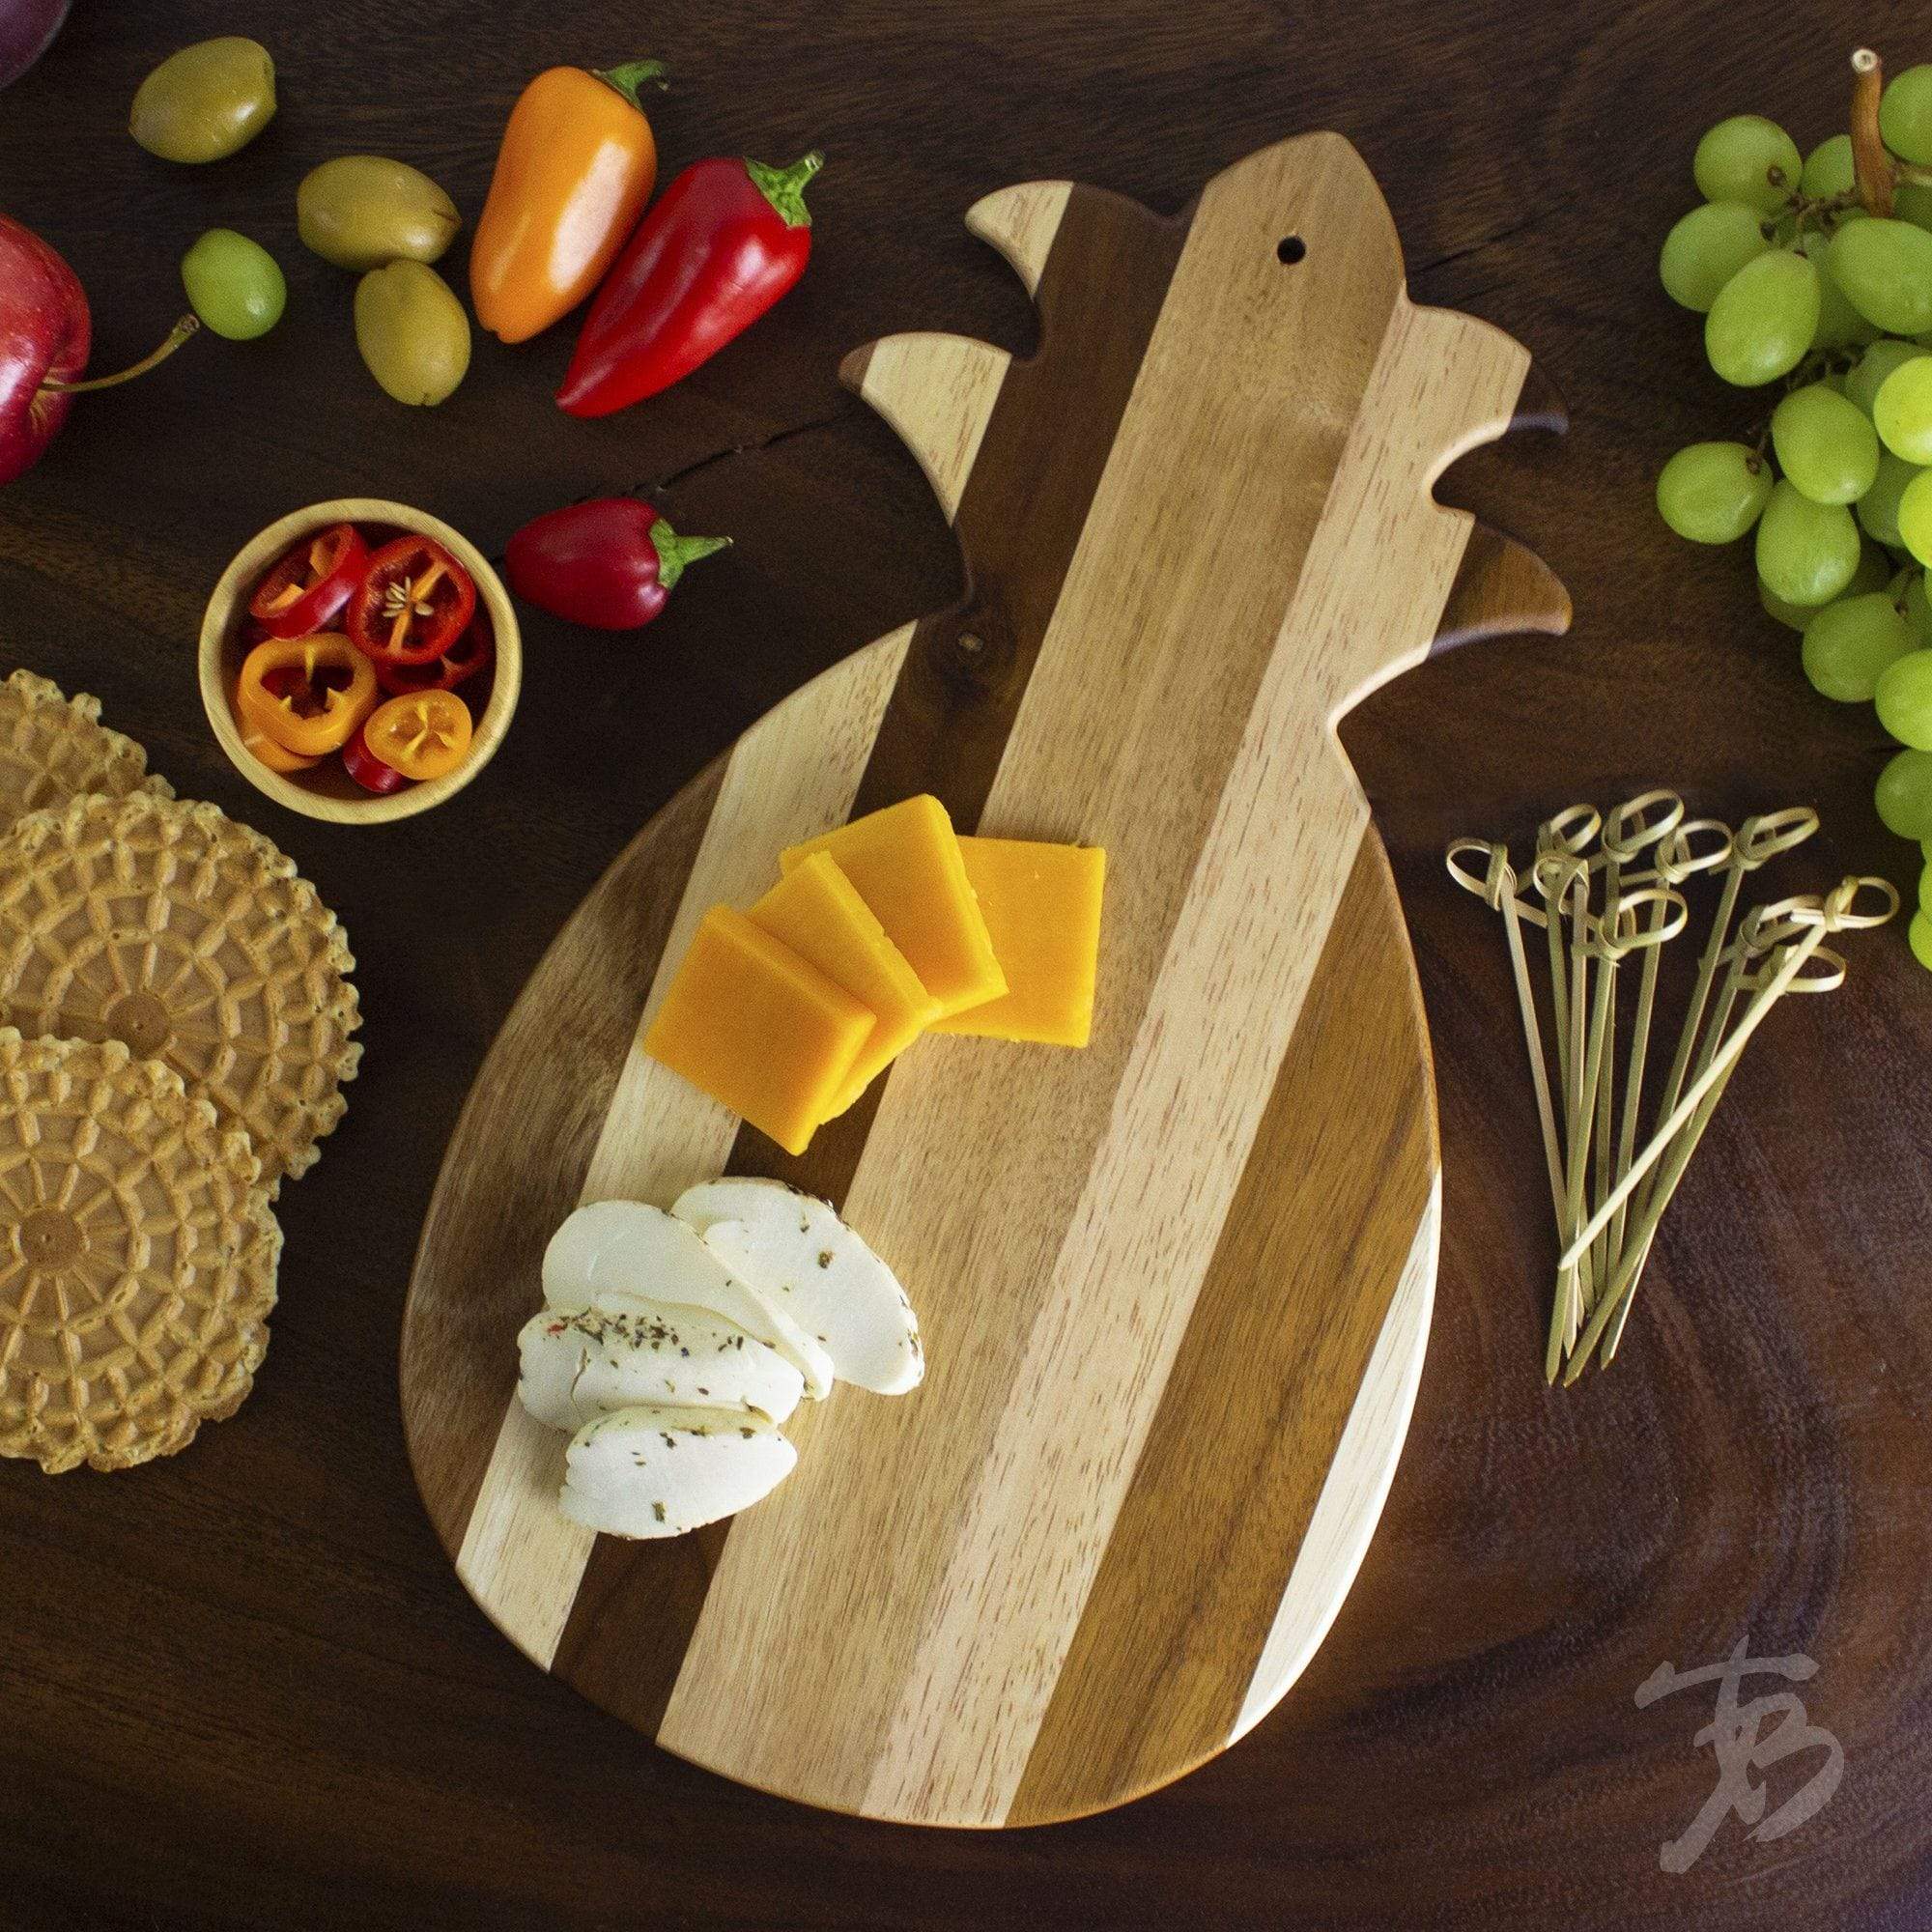 https://totallybamboo.com/cdn/shop/products/rock-branchr-shiplap-series-pineapple-shaped-wood-serving-and-cutting-board-totally-bamboo-699300.jpg?v=1628013501